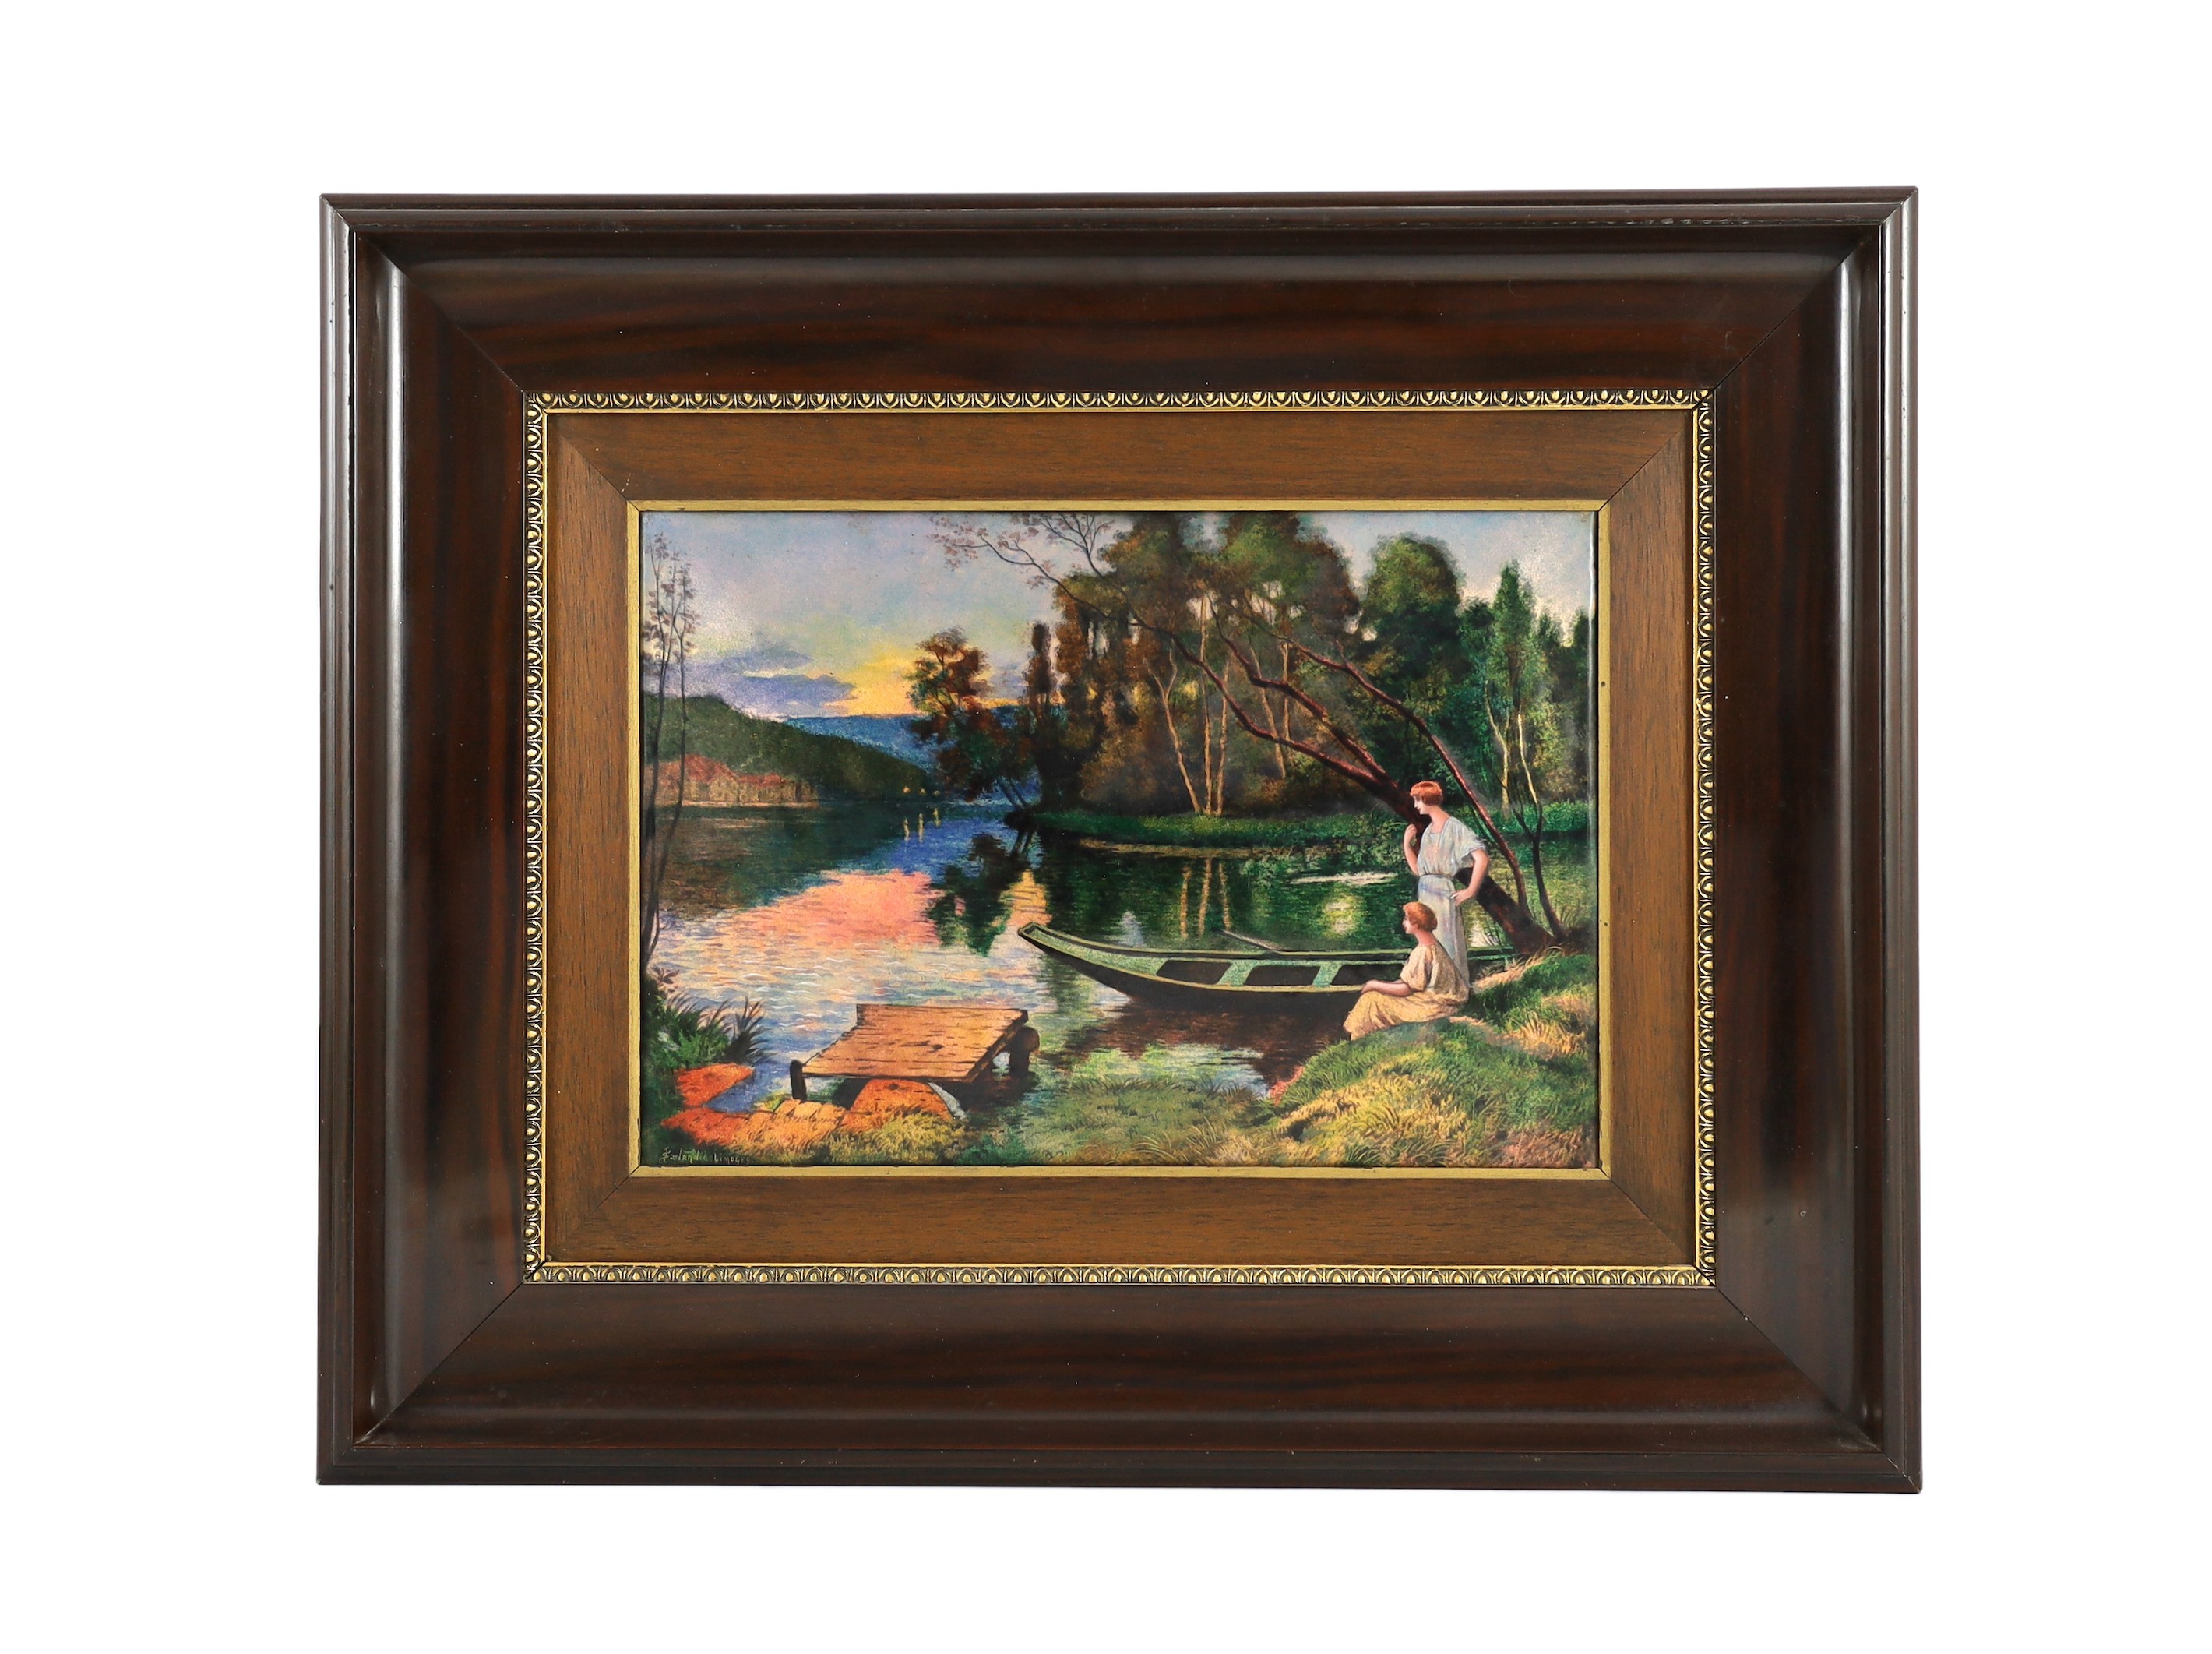 Jules Sarlandie (1874-1936), a large Art Deco Limoges enamel polychrome wall plaque, ‘Waiting for the ferryman’, 23.5cm x 34.5cm excluding frame